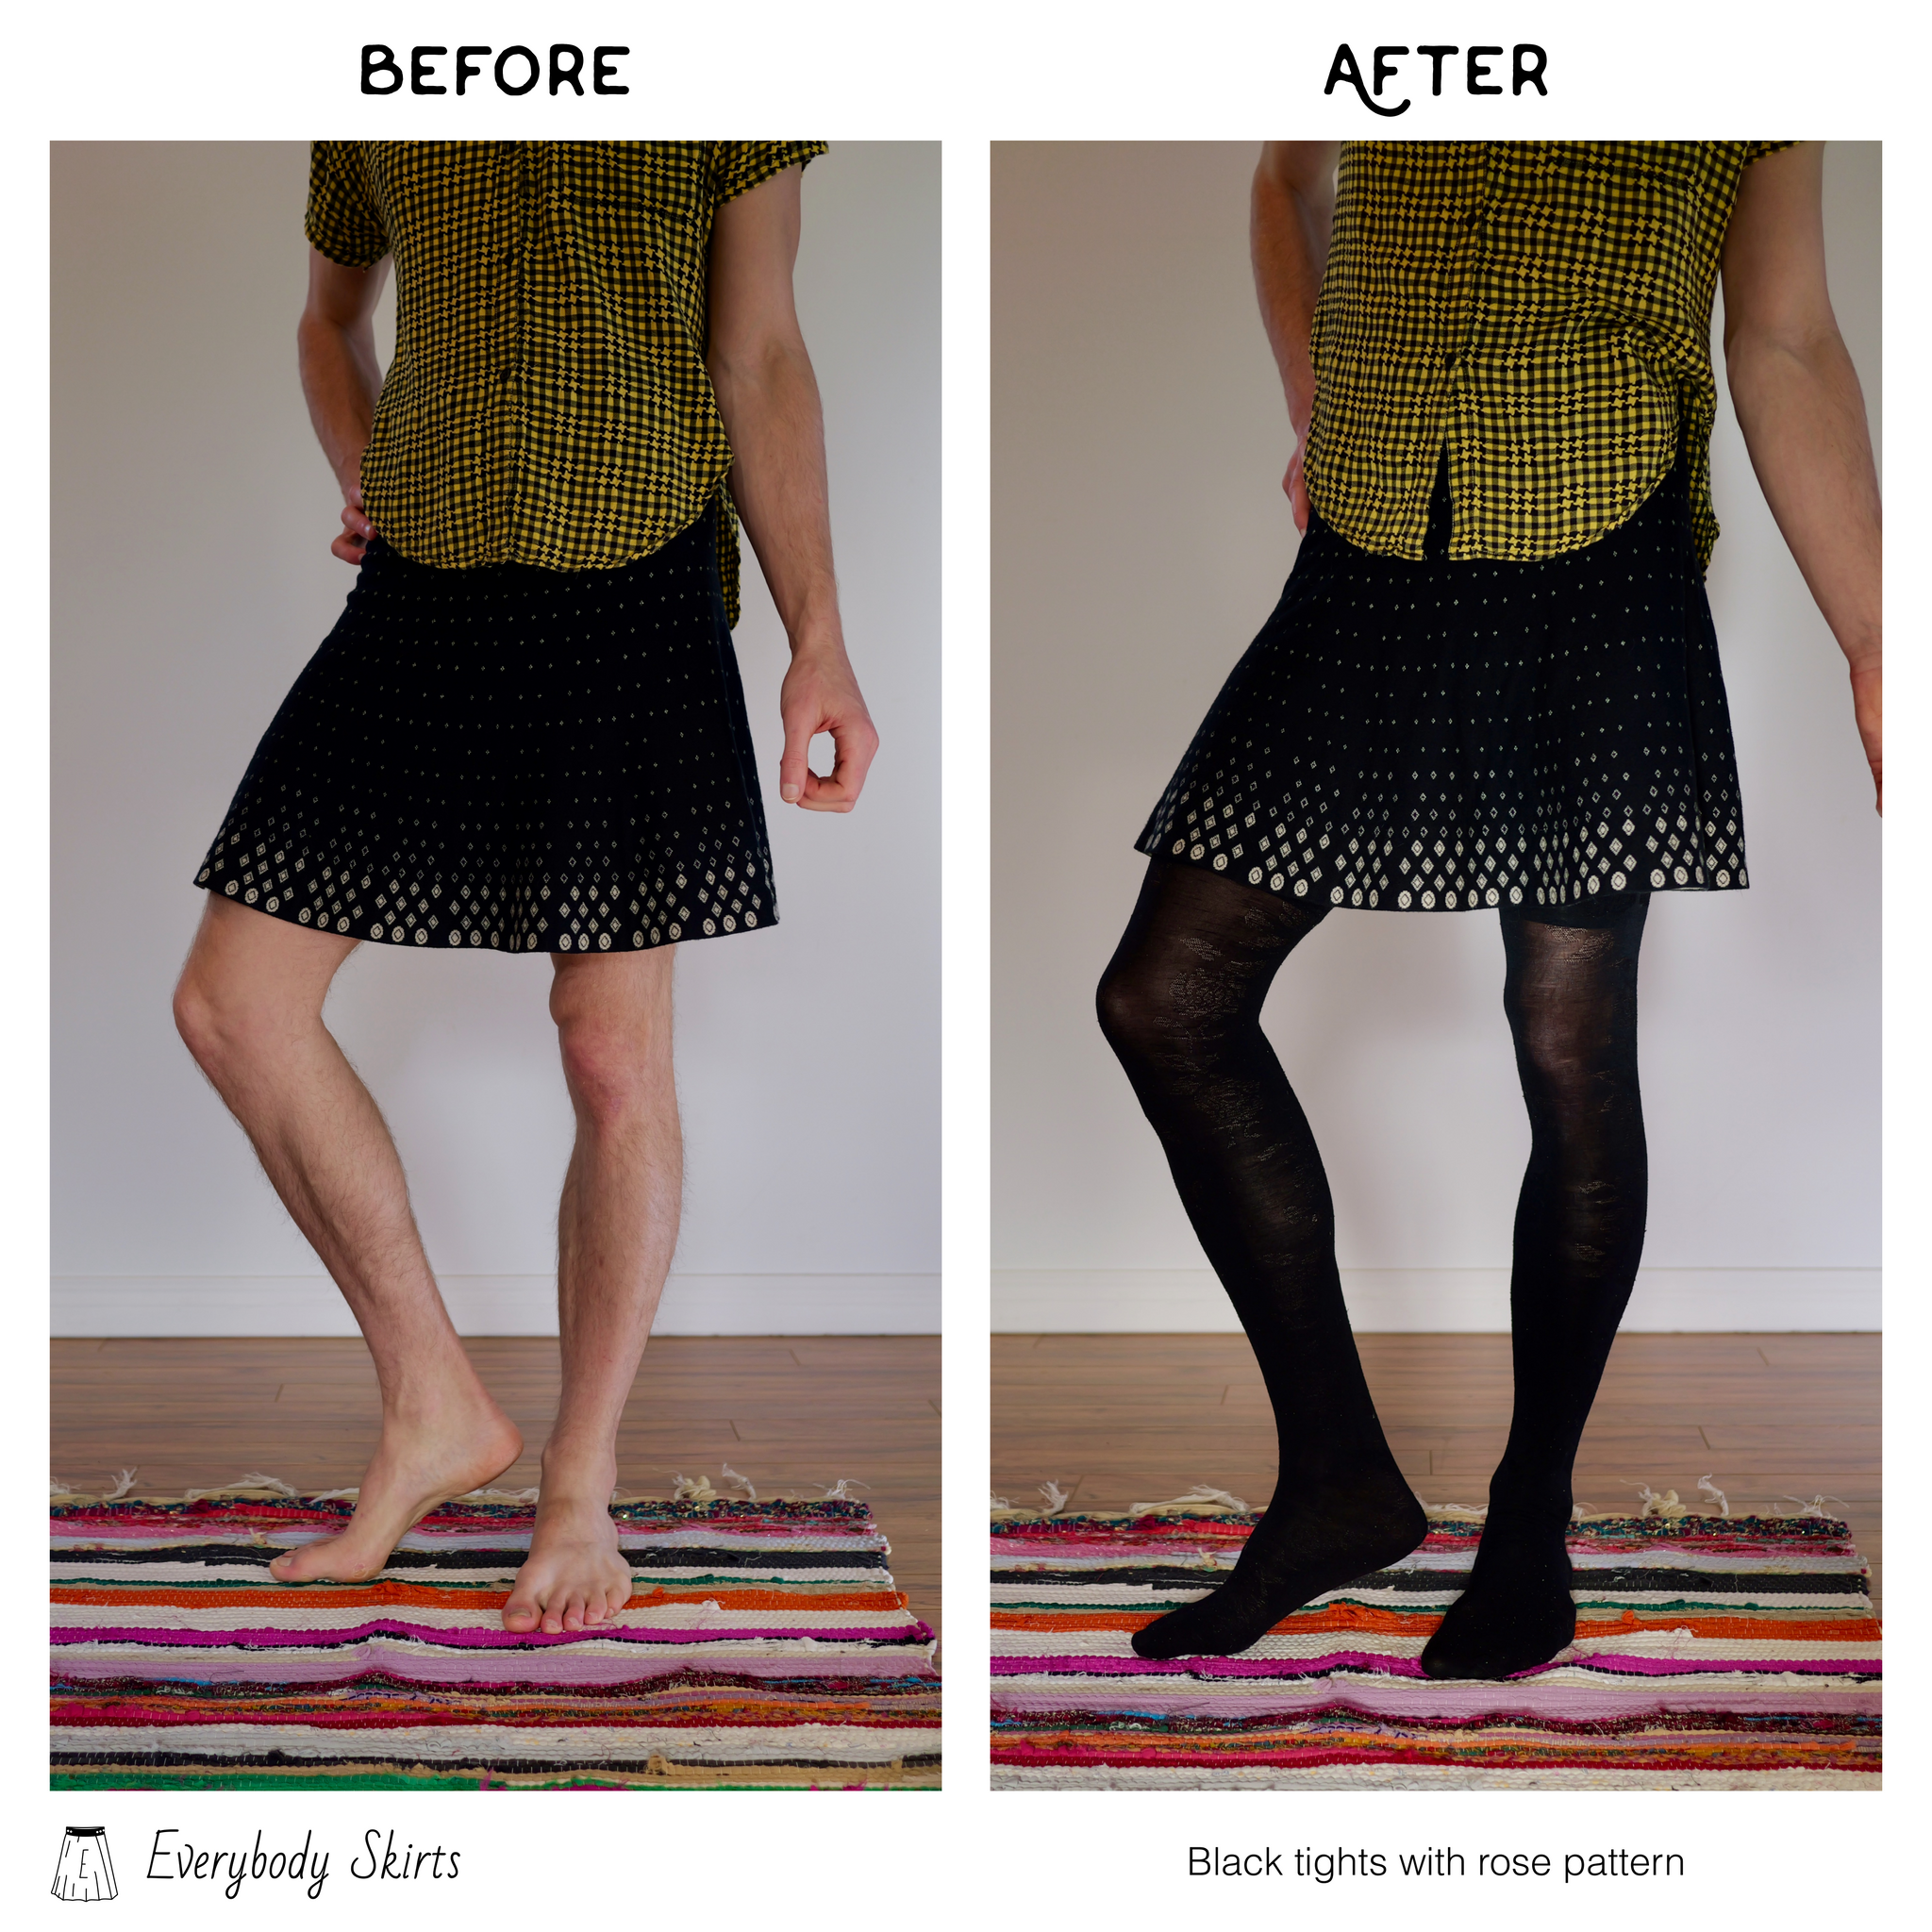 Before and after pictures of a male bodied individual with black skirt and yellow shirt. Bare legs in left shot, black tights with rose pattern in right shot.